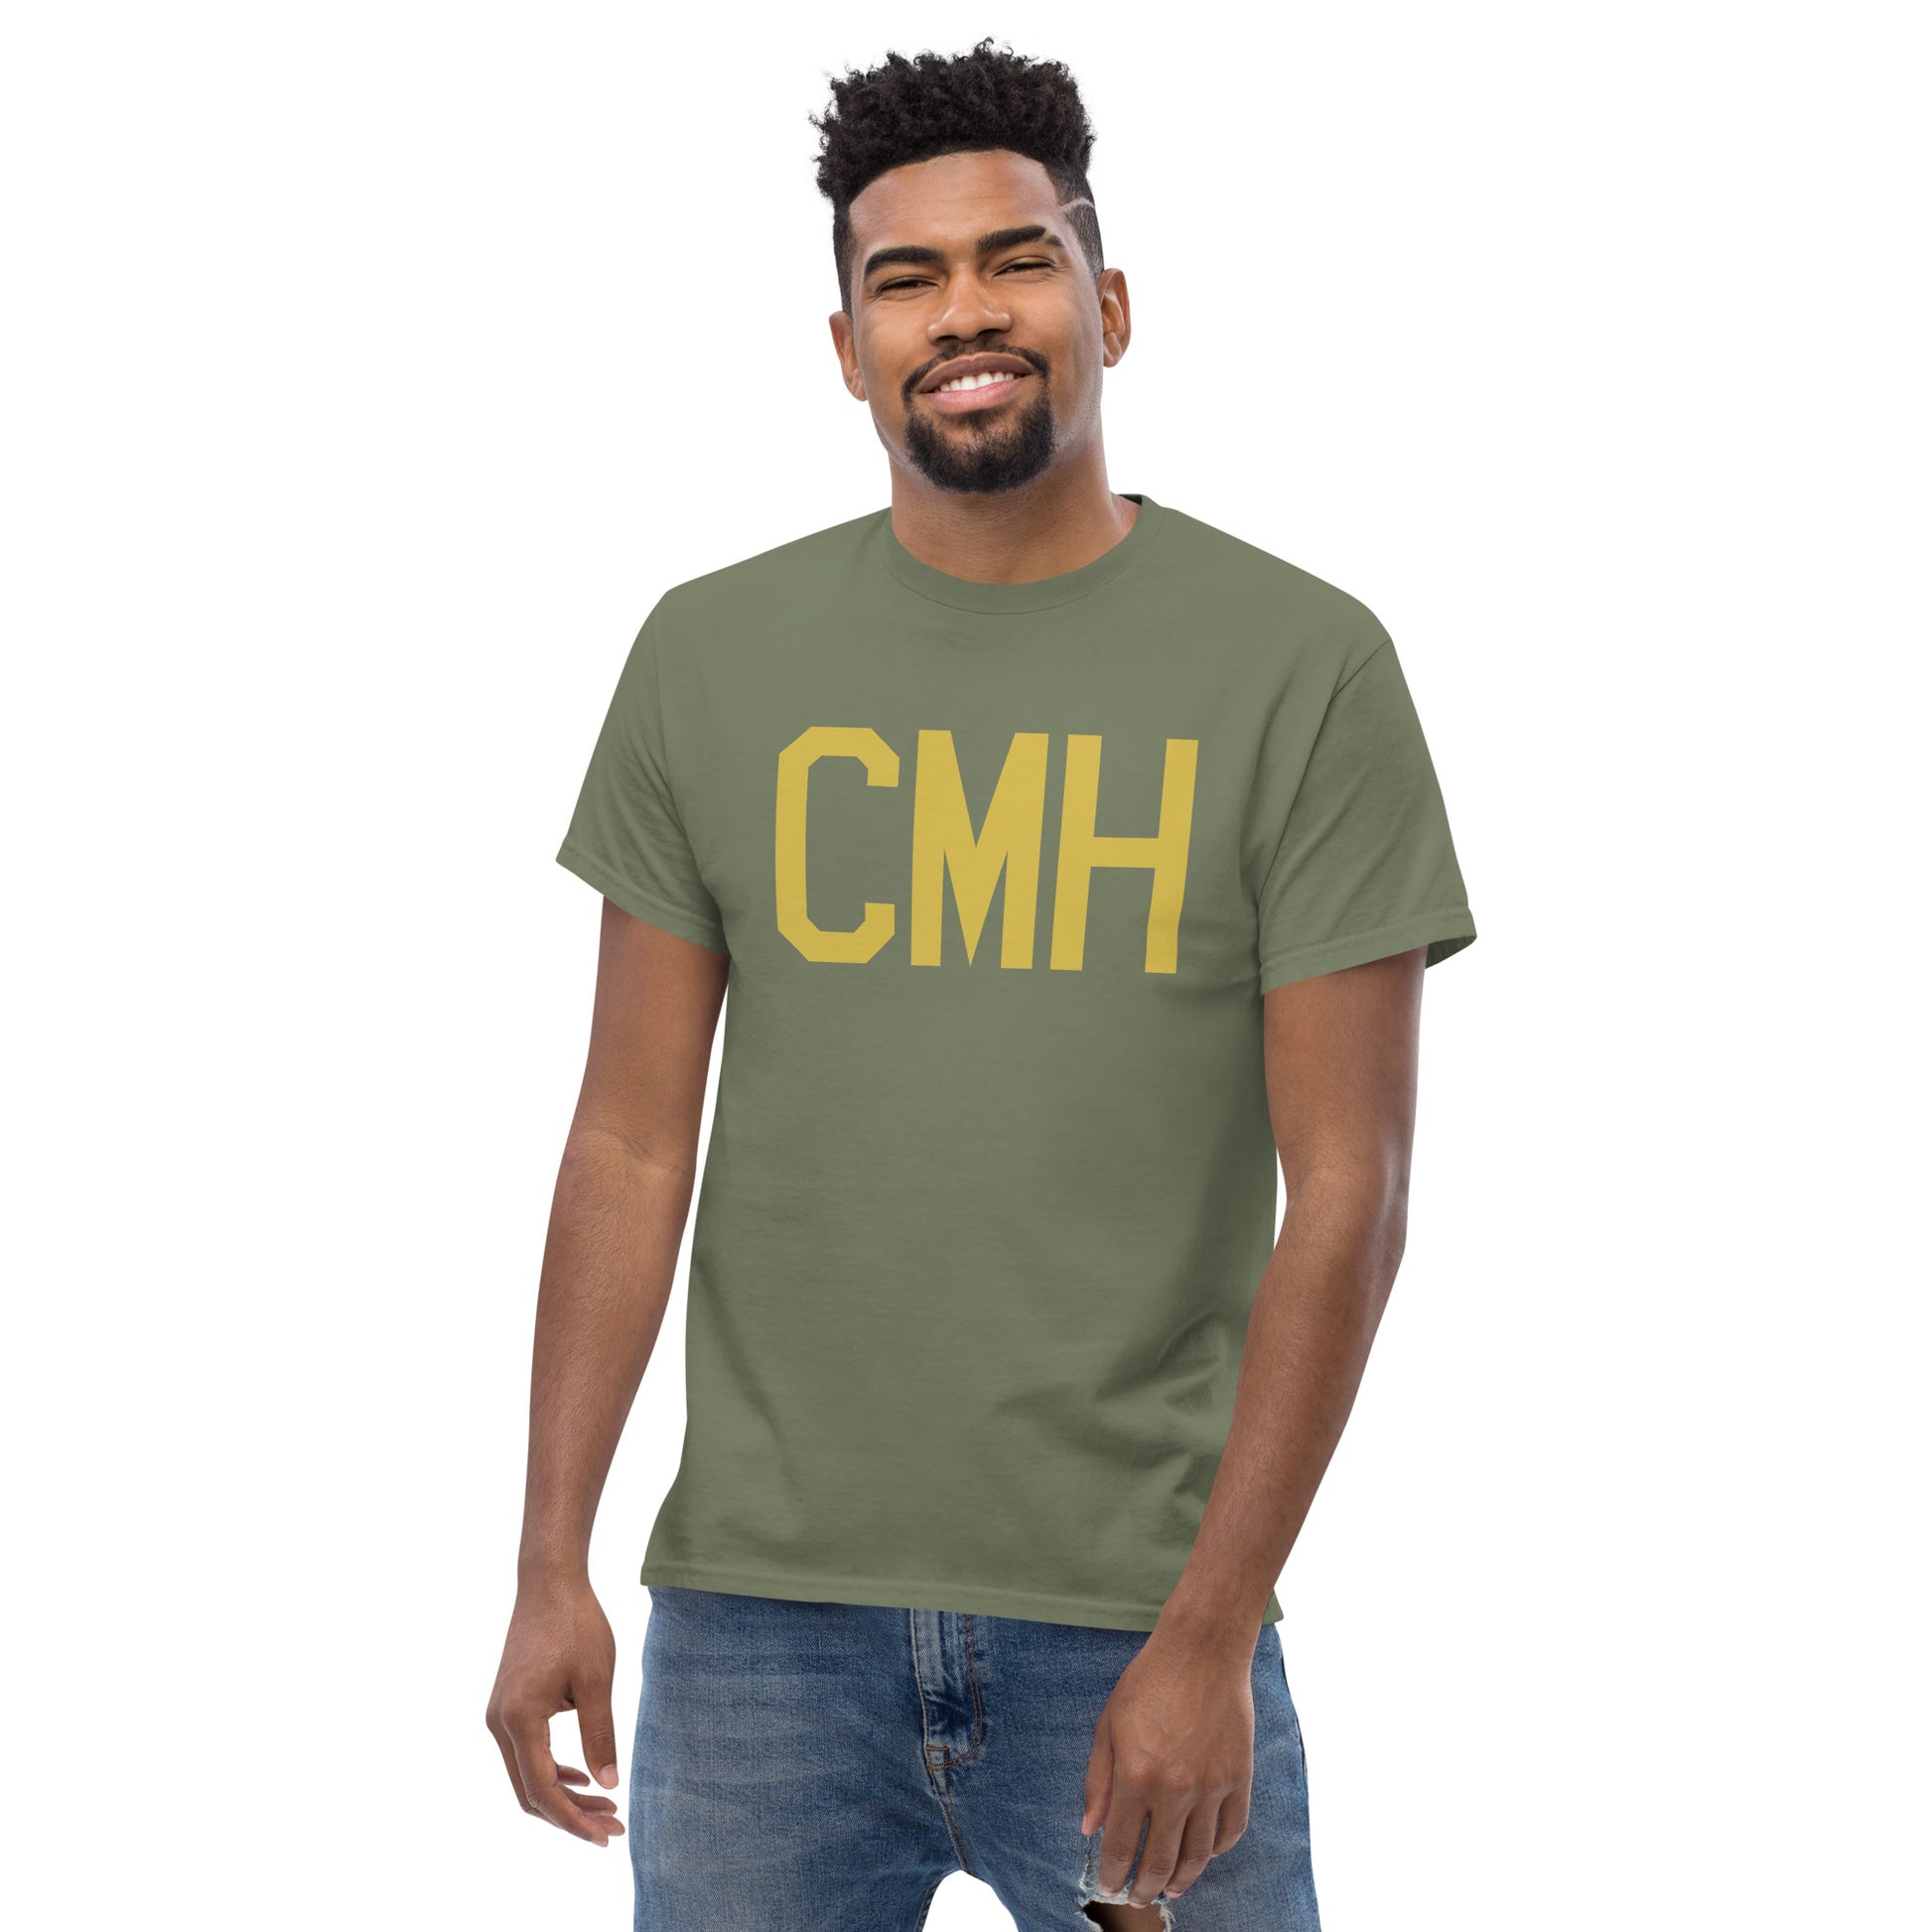 Aviation Enthusiast Men's Tee - Old Gold Graphic • CMH Columbus • YHM Designs - Image 06